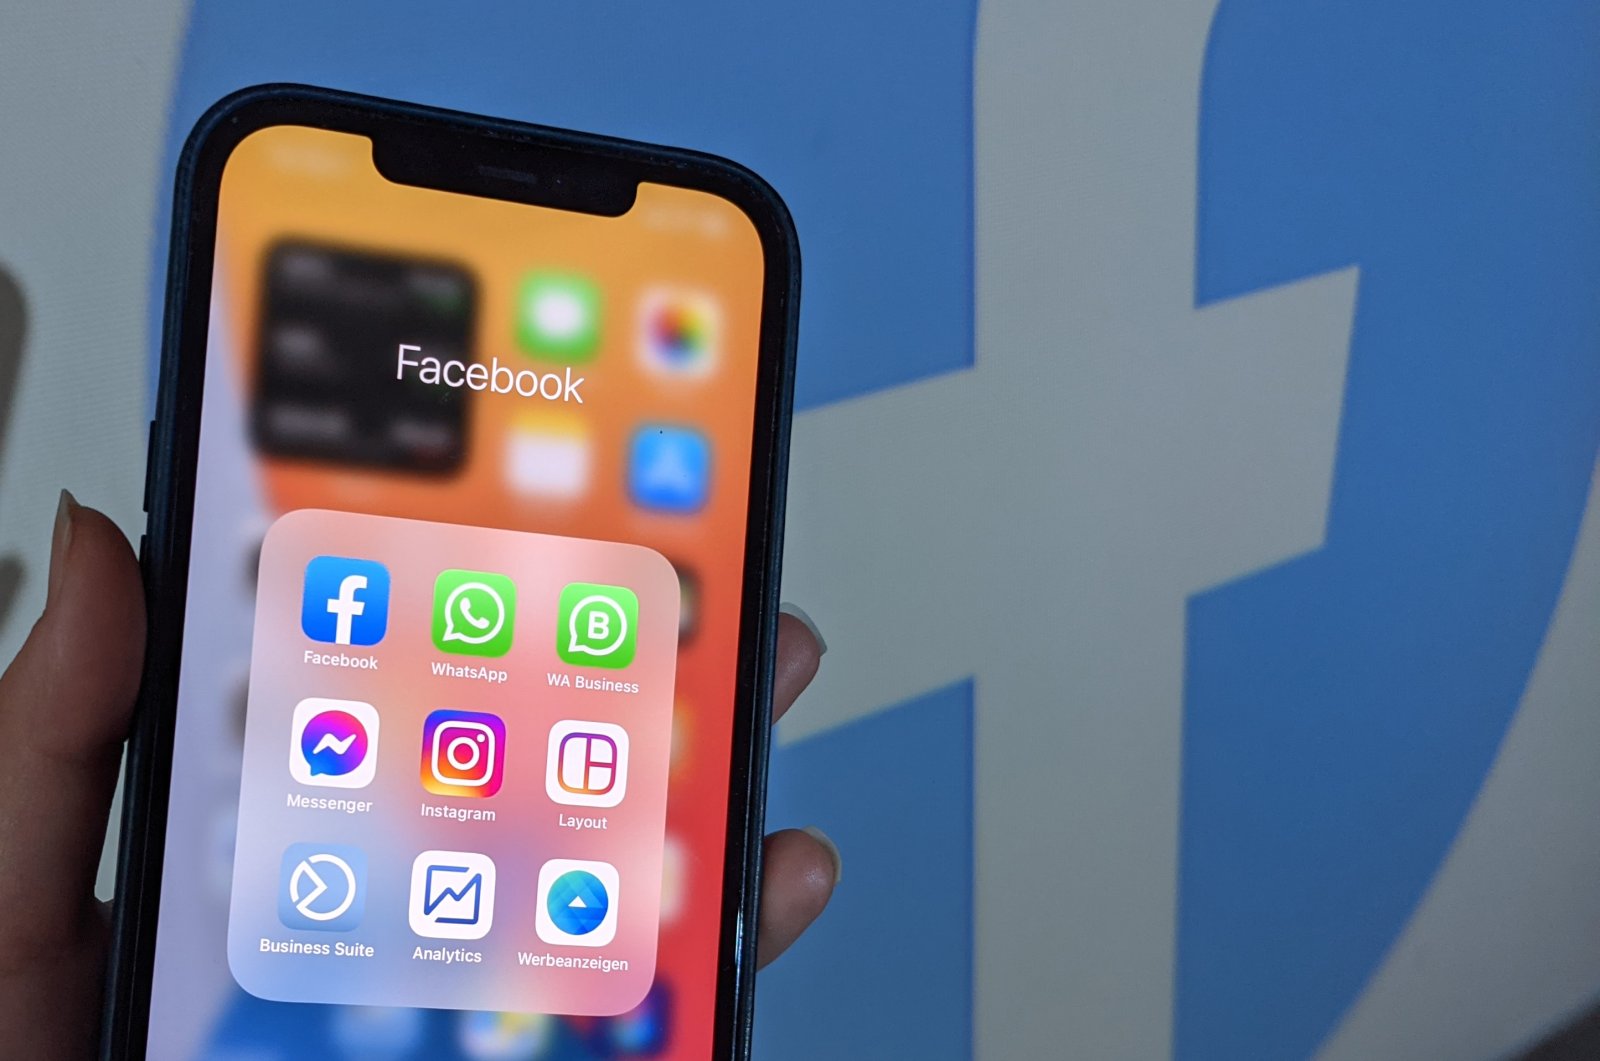 The apps of the Internet group Facebook, including Facebook, WhatsApp, WhatsApp Business, Facebook Messenger, Instagram, Instagram Layout, Facebook Business Suite, Facebook Analytics, Facebook Ads Manager are seen on an iPhone 12. (Getty Images)